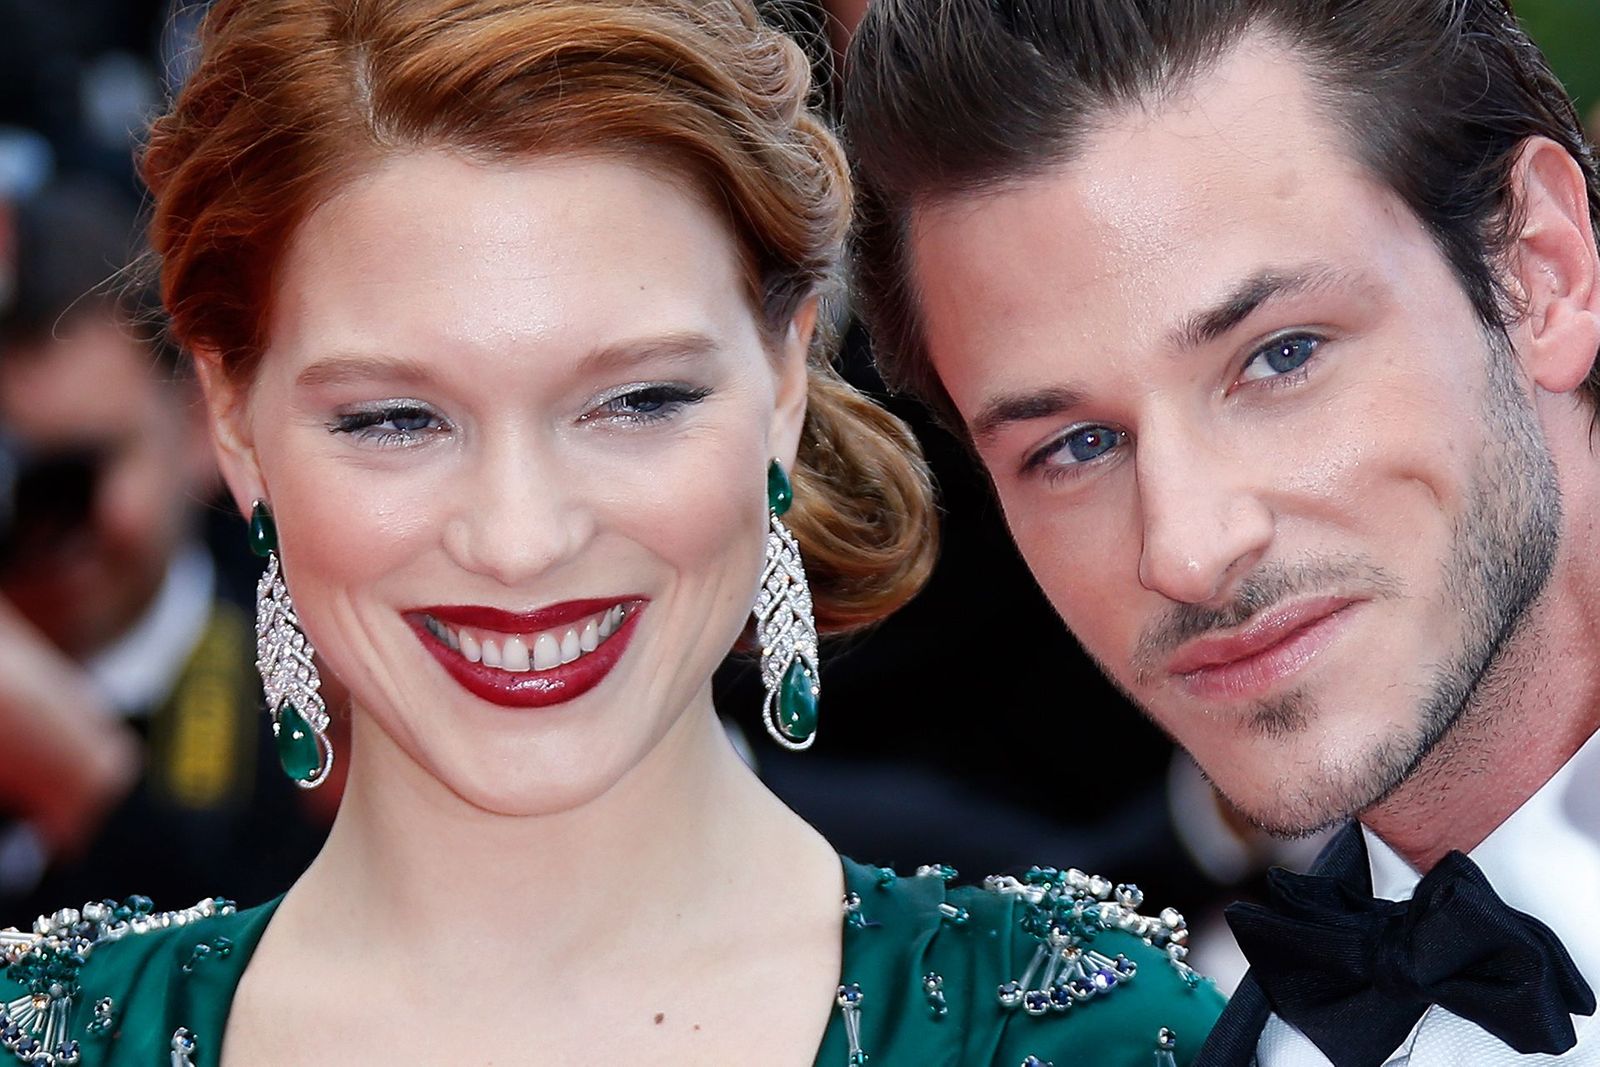 Gaspard Ulliel (L) and Lea Seydoux arrive on the red carpet before